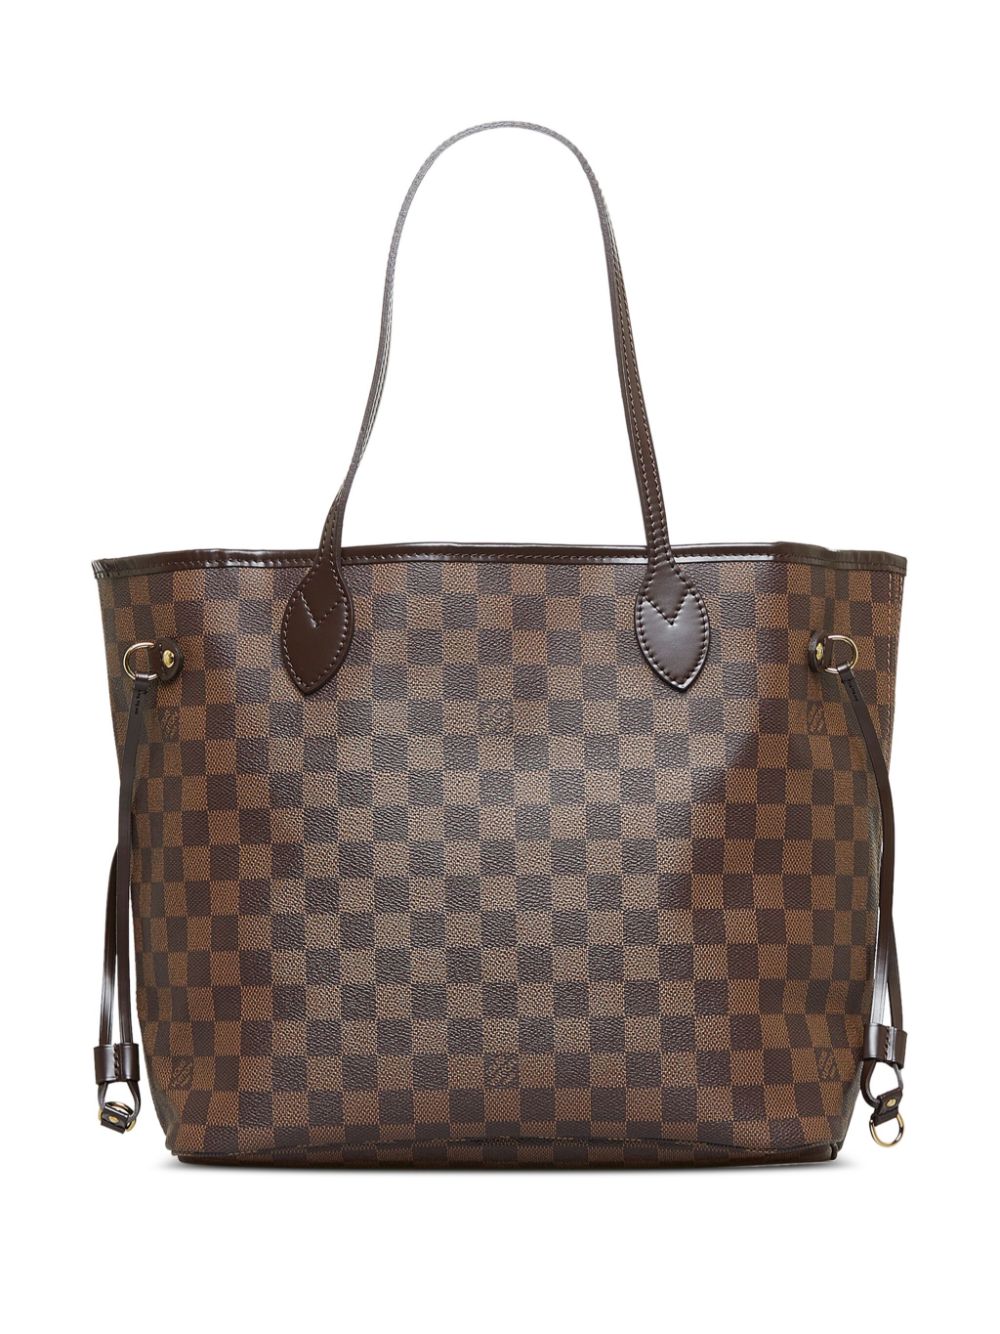 Louis Vuitton 2011 pre-owned Neverfull MM tote bag - Bruin